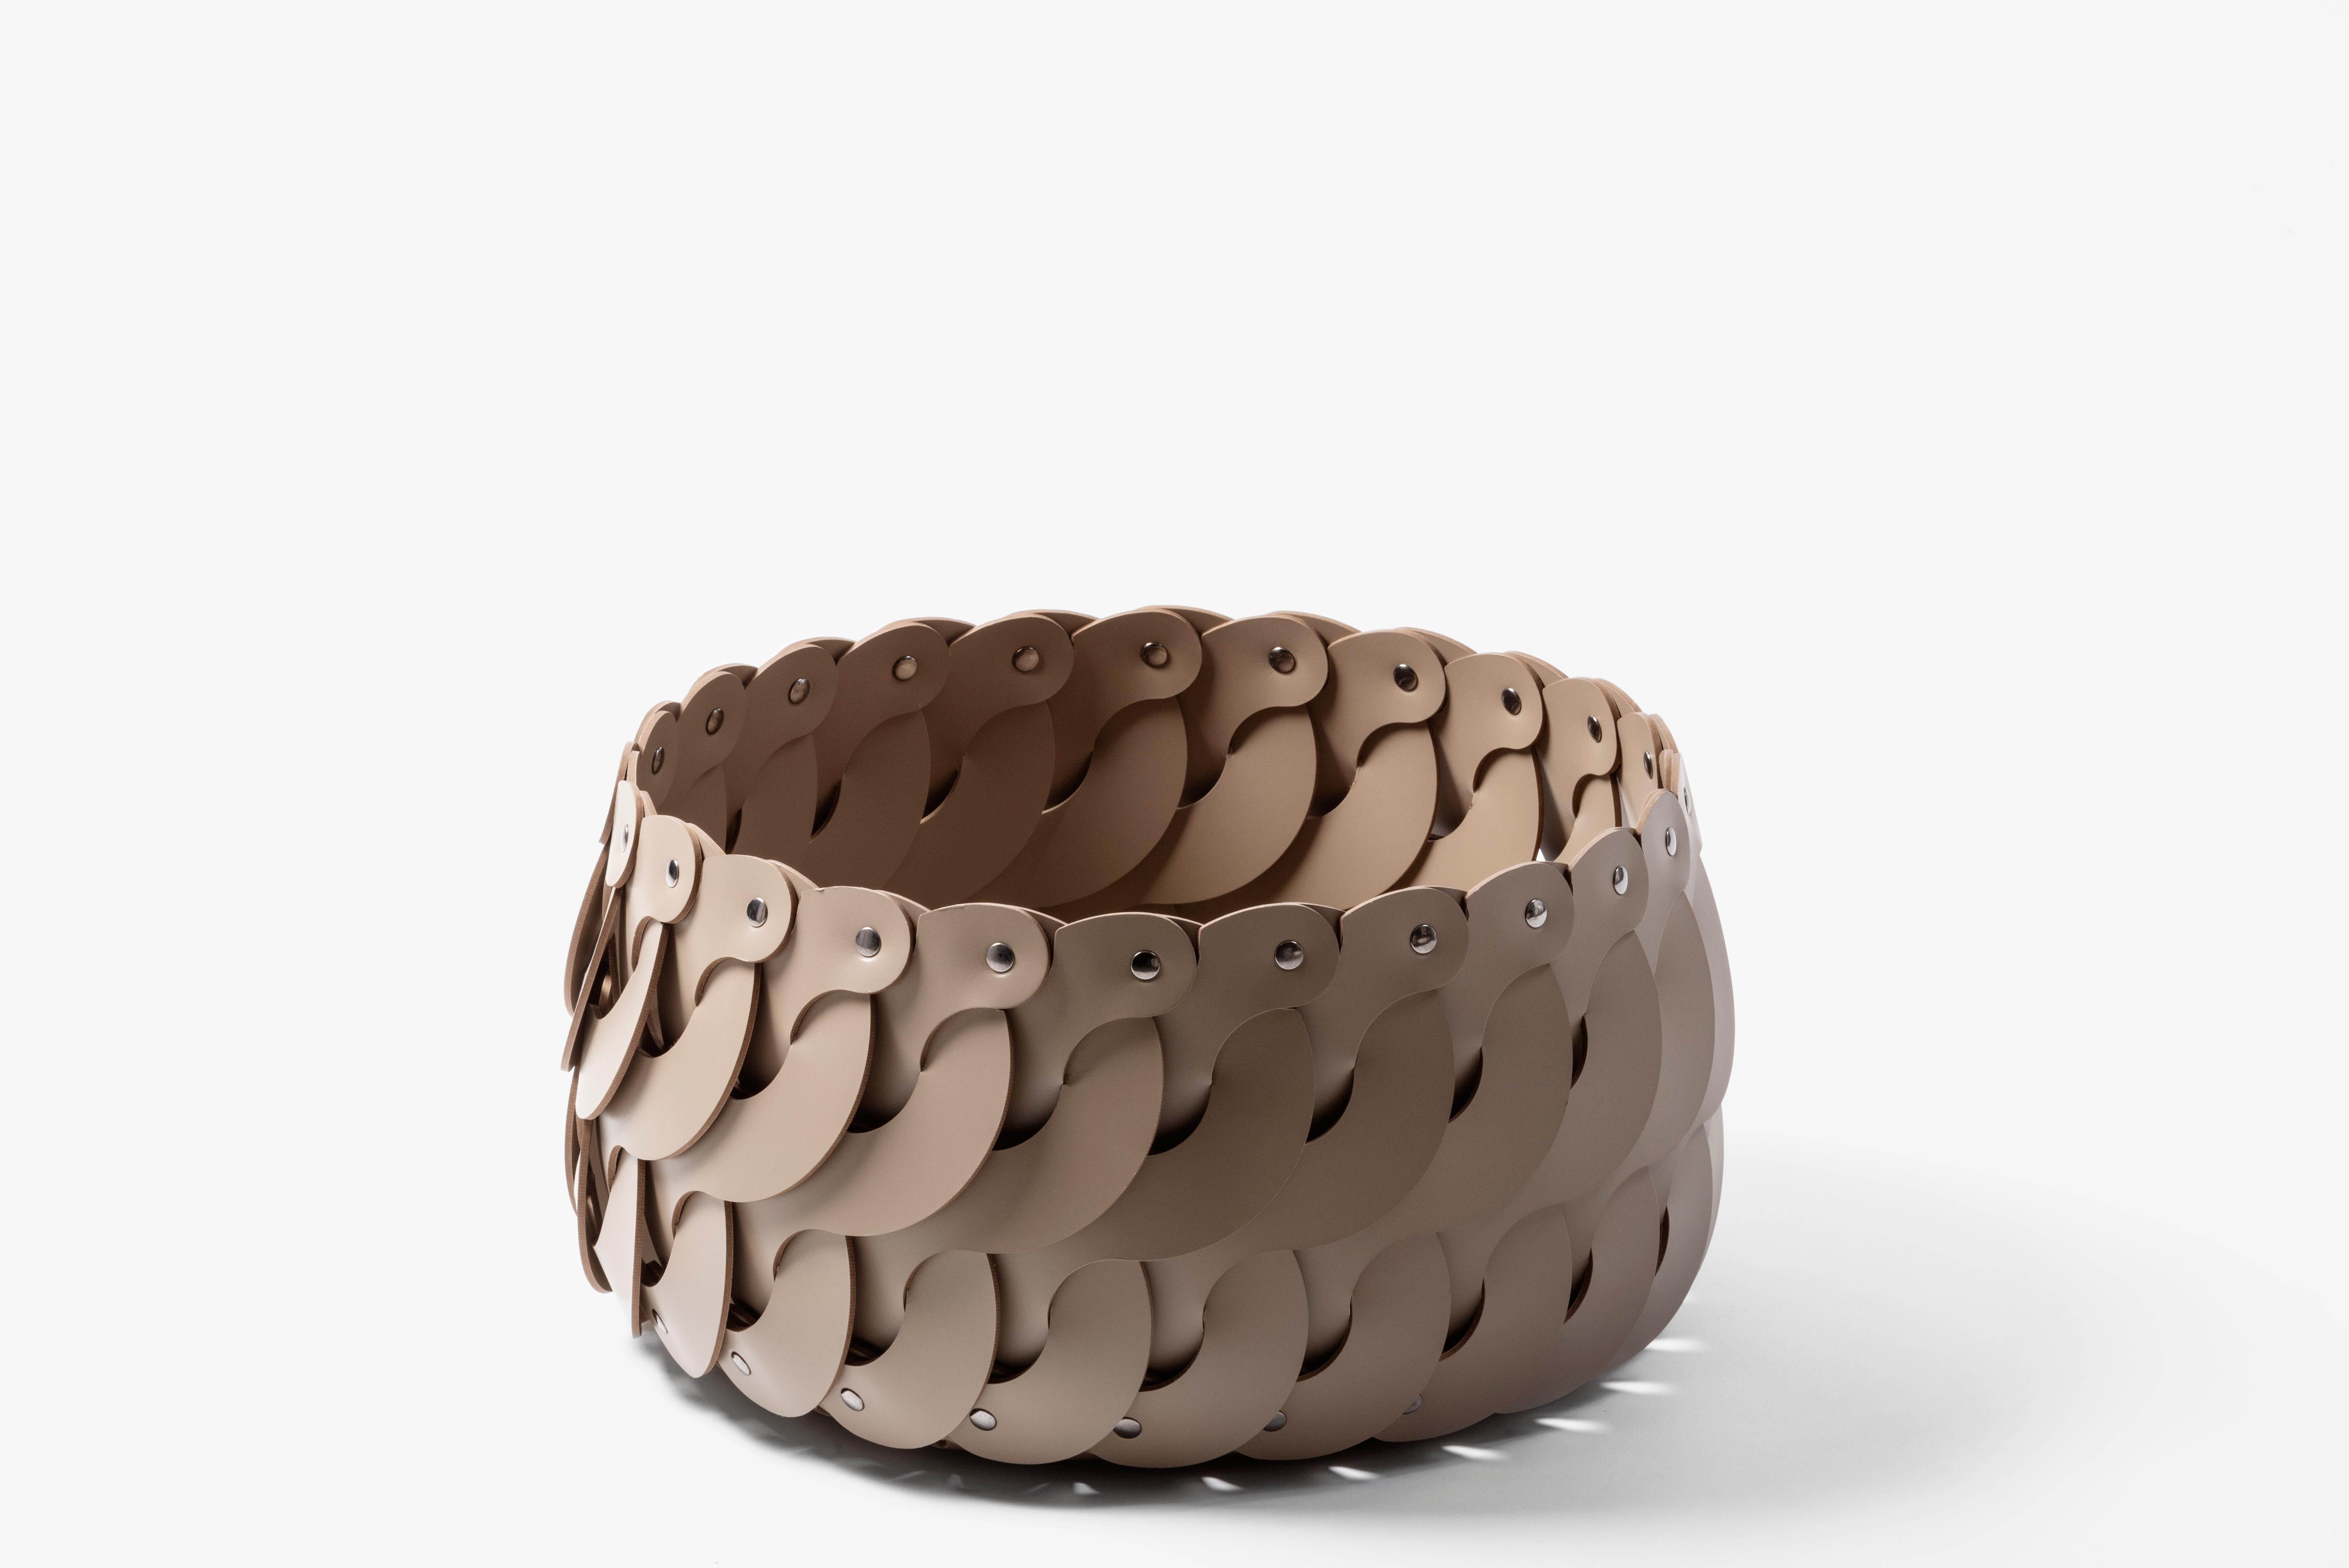 This elegant round basket with lid features a unique woven frame handcrafted of S-shaped taupe leather strips. Perfect to store any home essentials, it can also be used outdoors on a patio or poolside.

It is available in the Alicante colors and